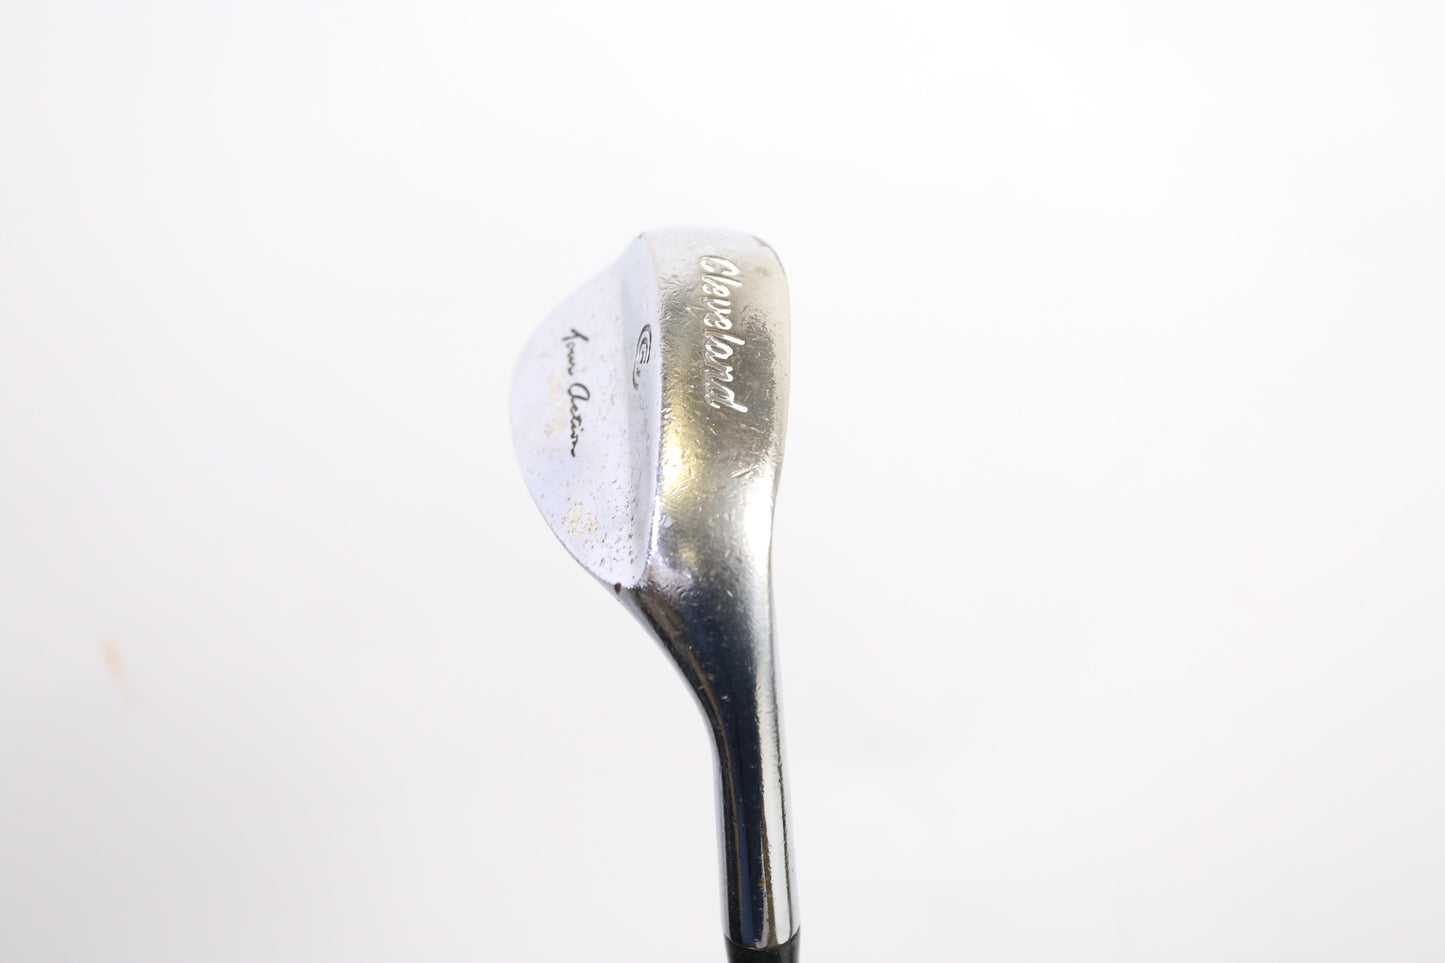 Used Cleveland 588 Tour Action Lob Wedge - Right-Handed - 60 Degrees - Stiff Flex